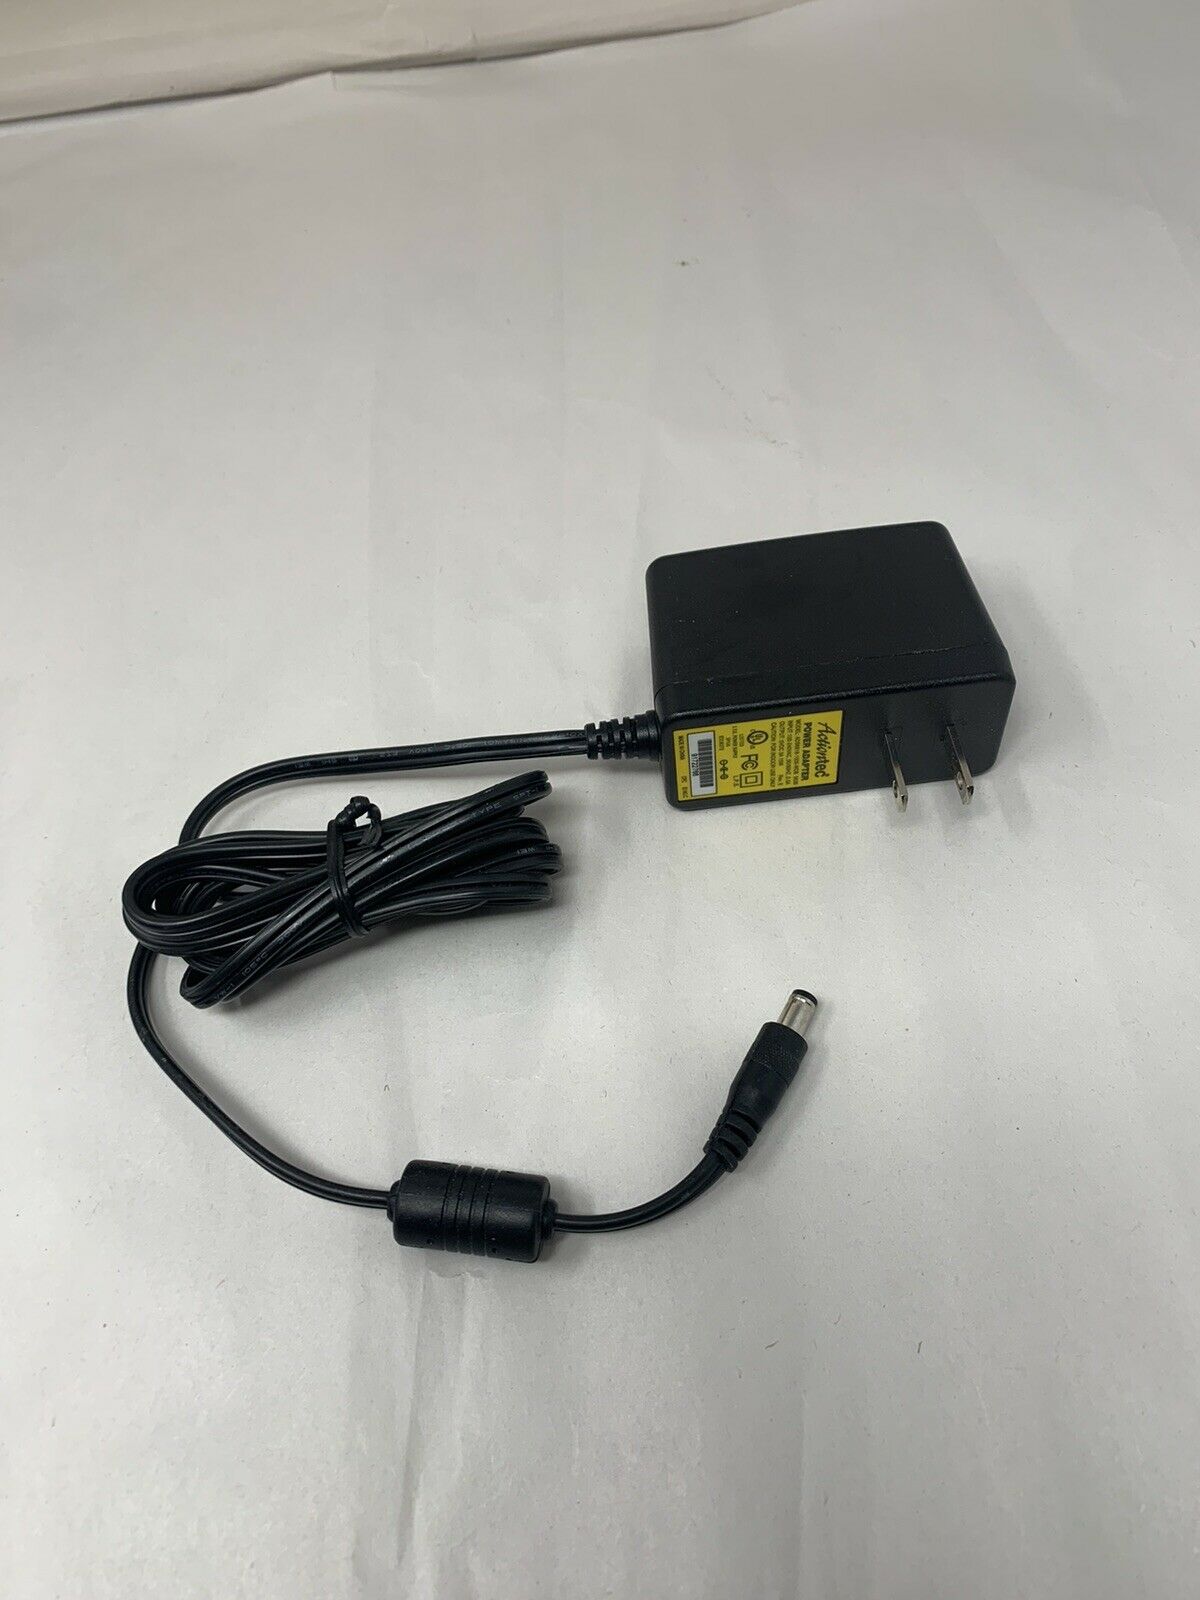 5V 3.0A Actiontec ADS6818-1505-WDB Power Adapter New Open Box Brand: Actiontec Model: ADS6818-1505-WDB UPC: Does No